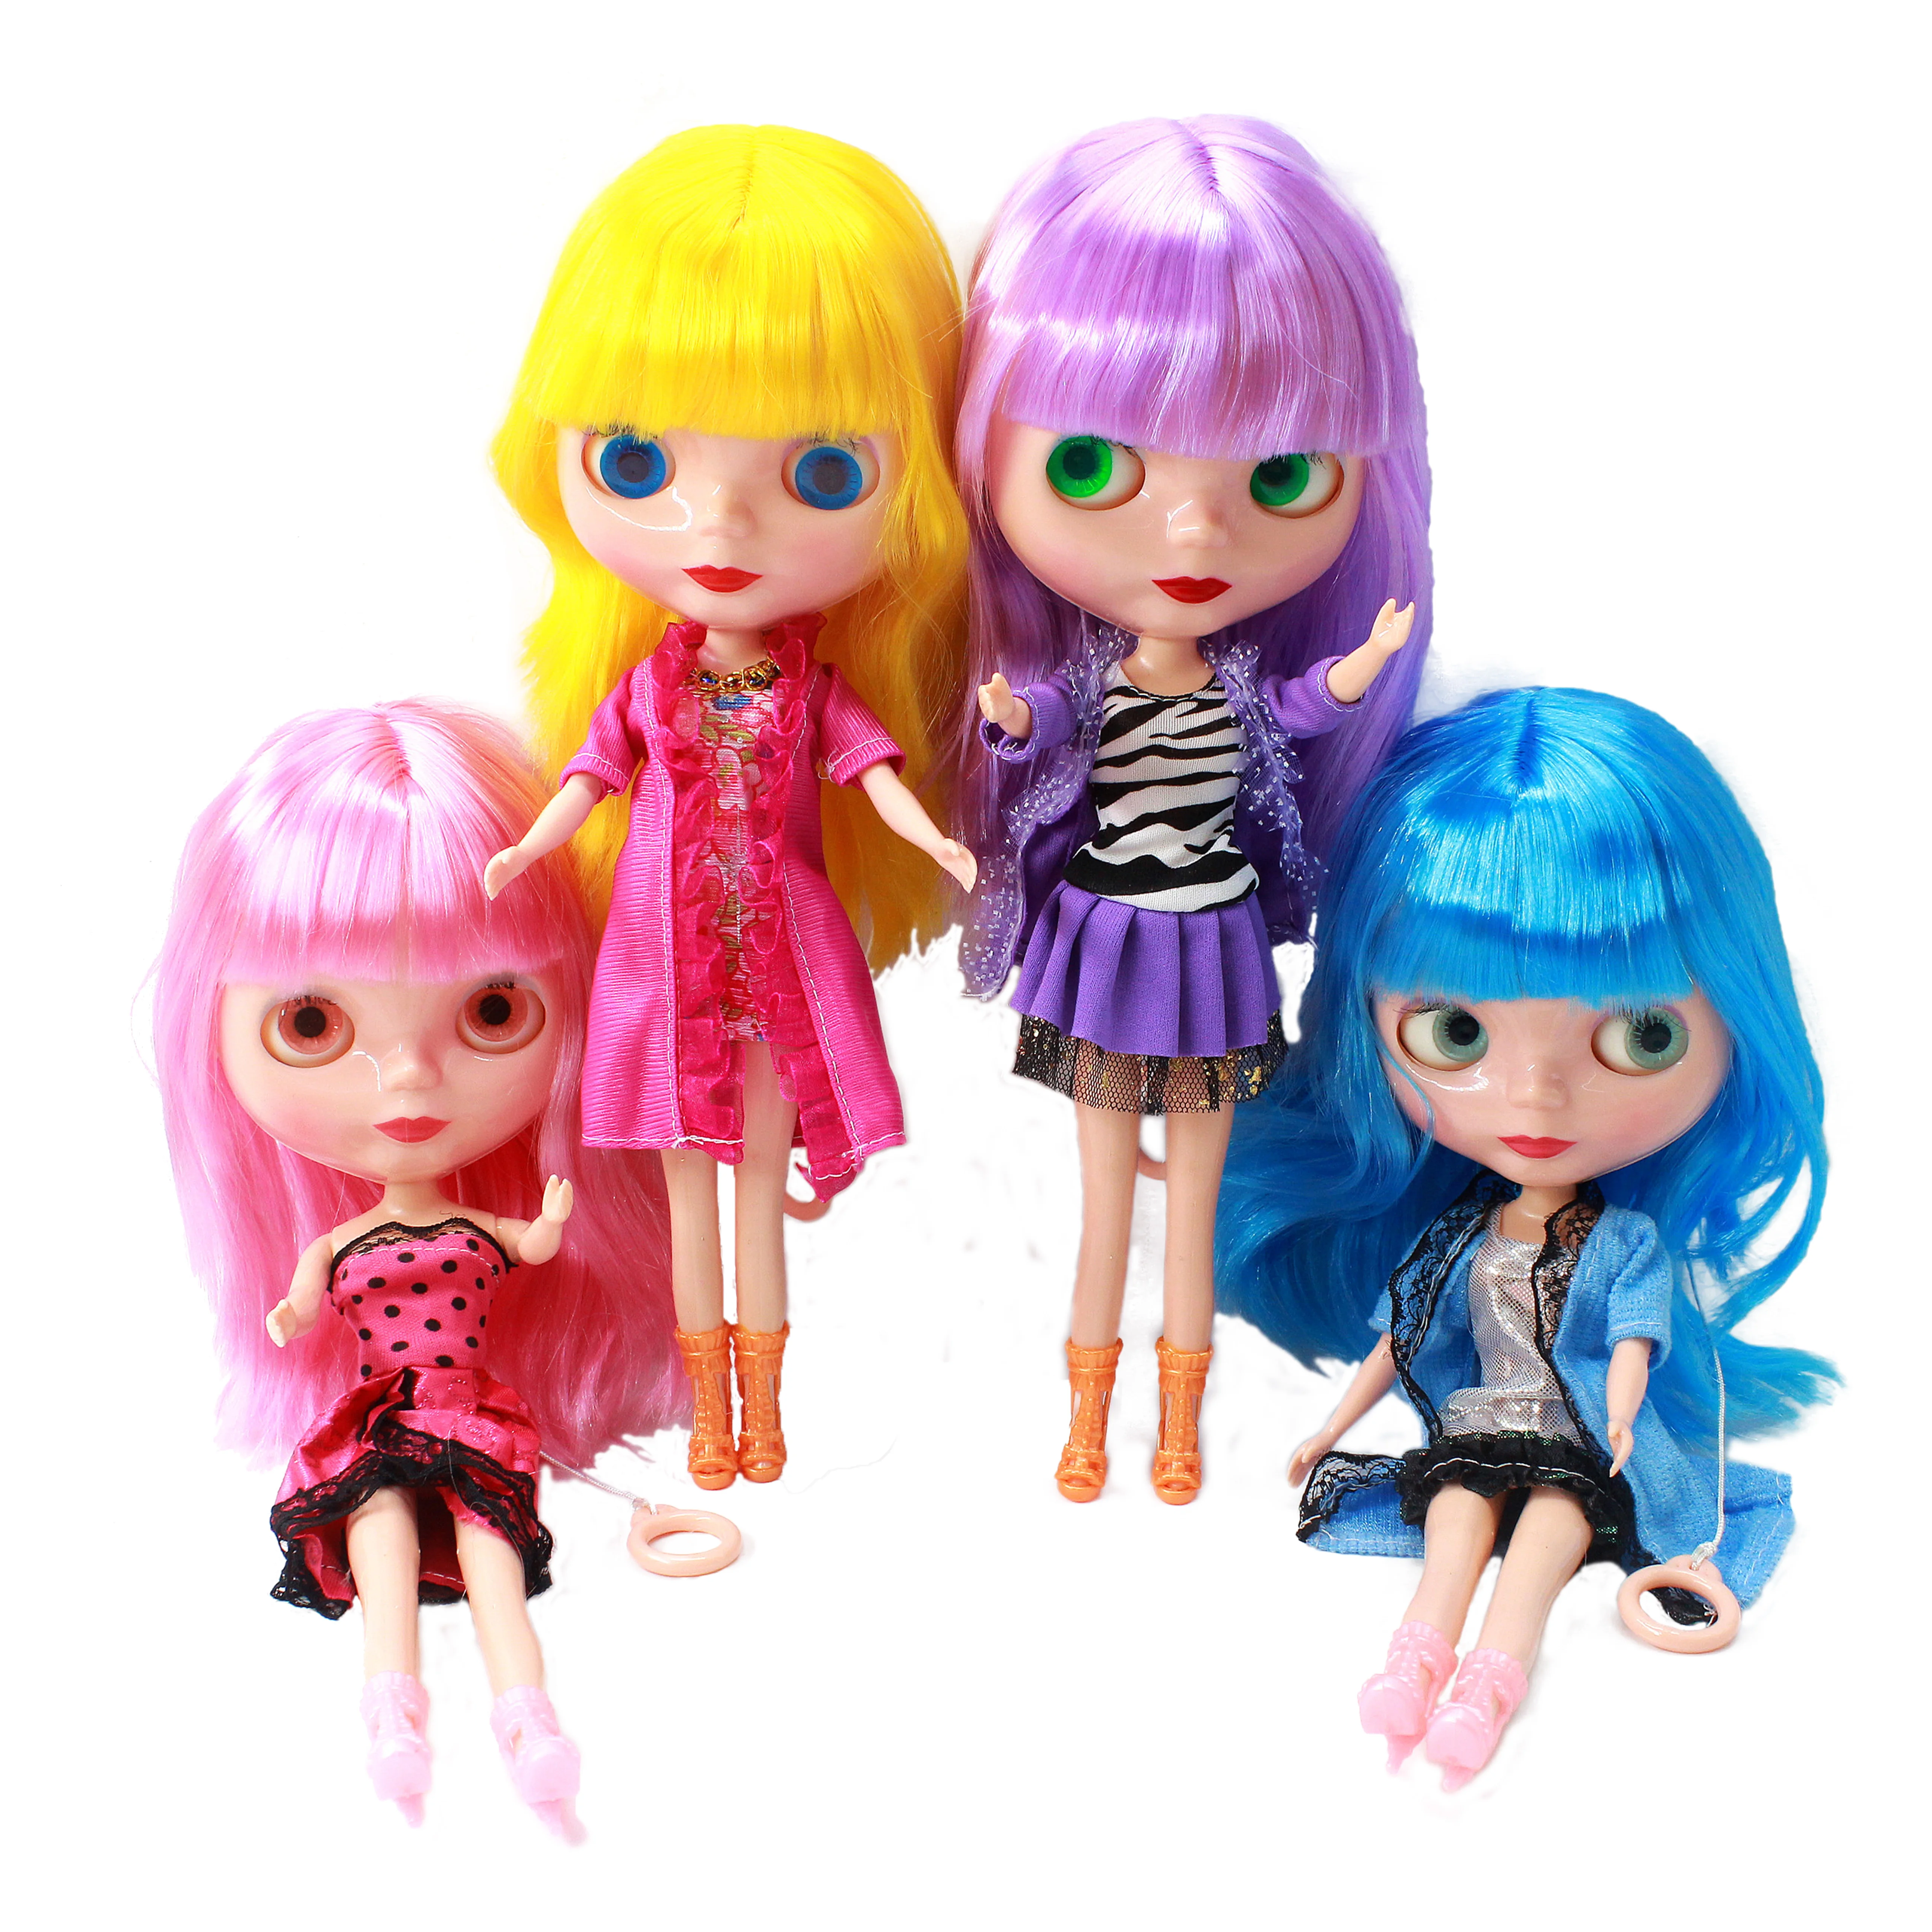 

30cm Joint BJD Dolls for Girl Fashion Blyth Doll Colour Hair DIY body Makeup Nude Doll Dress Up Toys for Girls GIFT